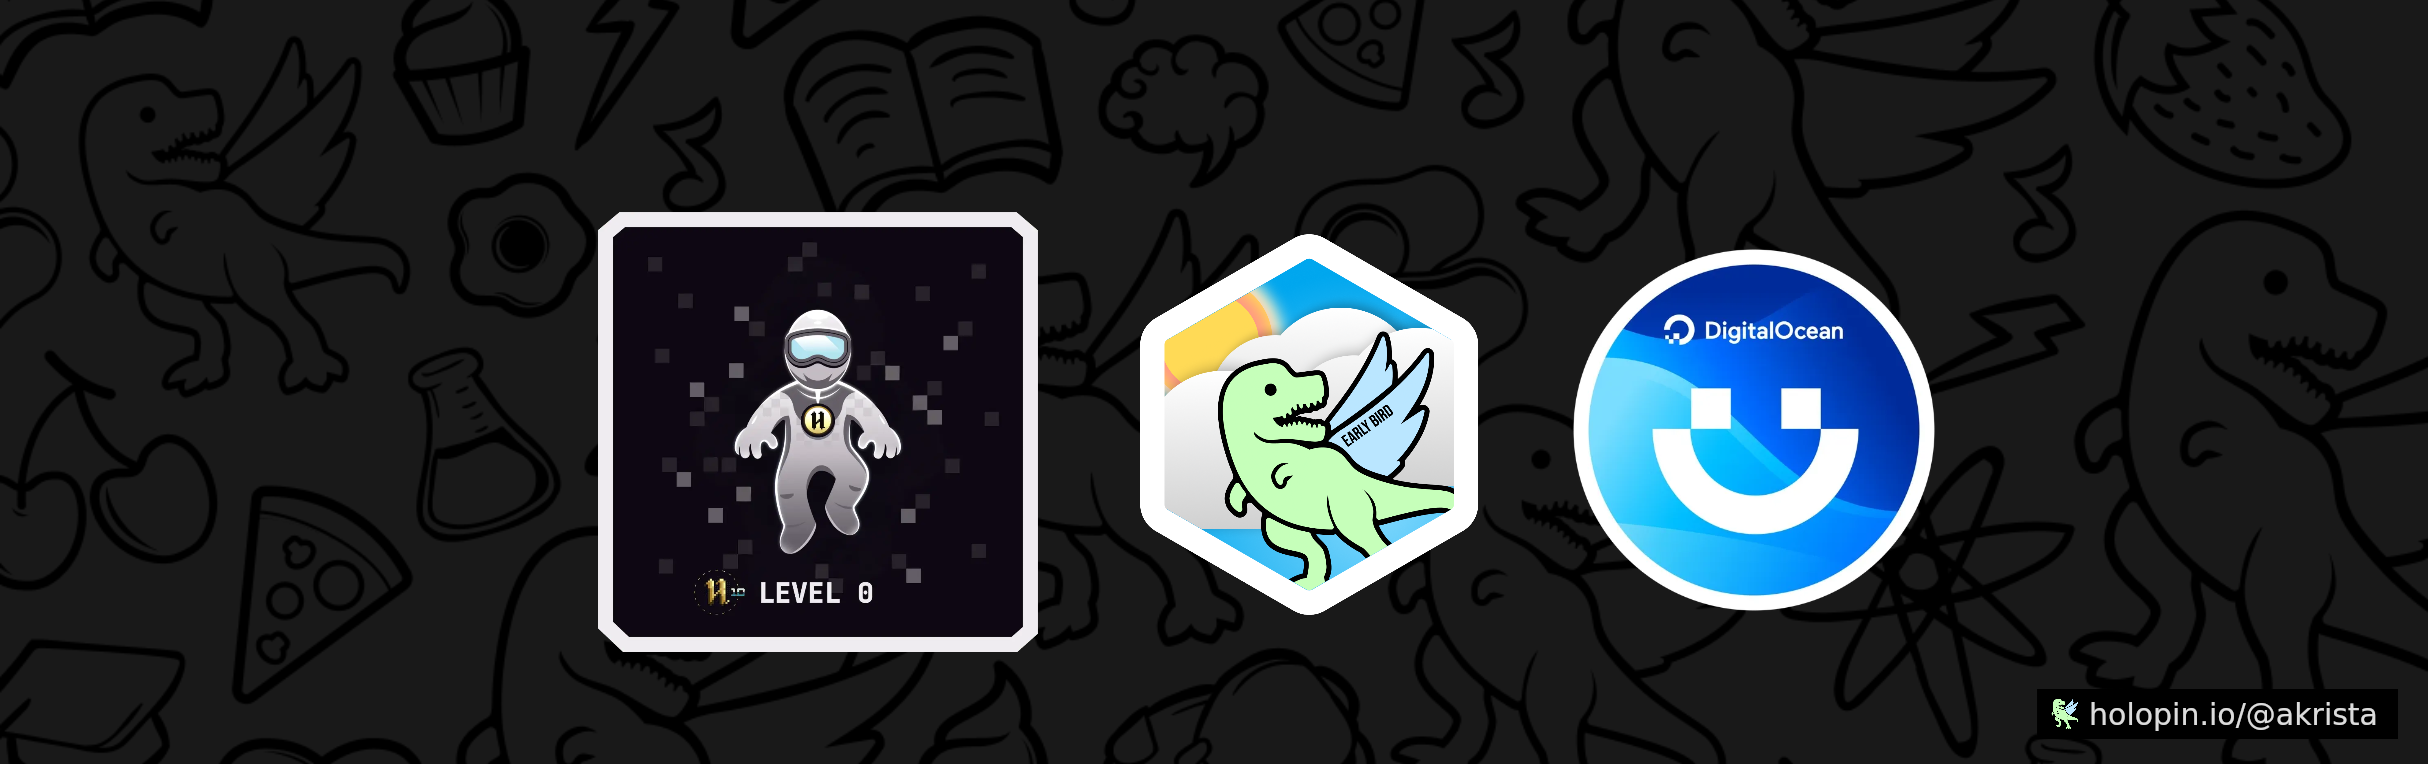 An image of @akrista's Holopin badges, which is a link to view their full Holopin profile